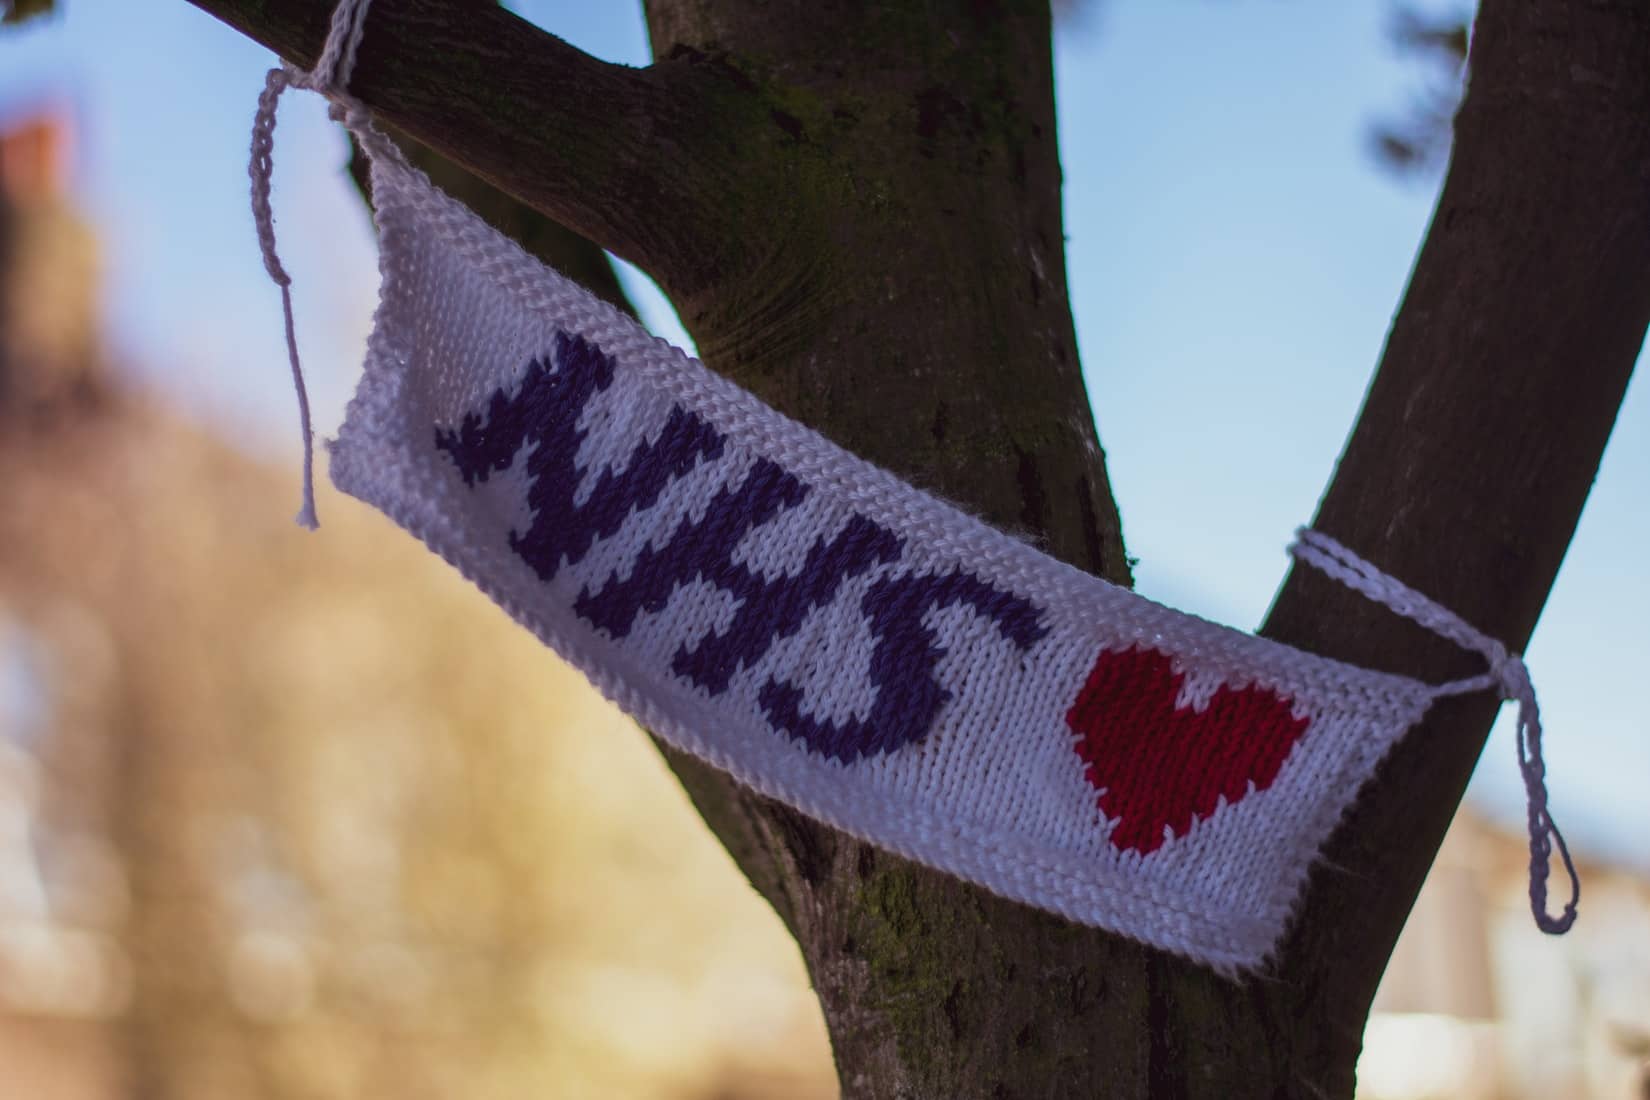 Knitted NHS banner in tree by Tugce Gungormezler